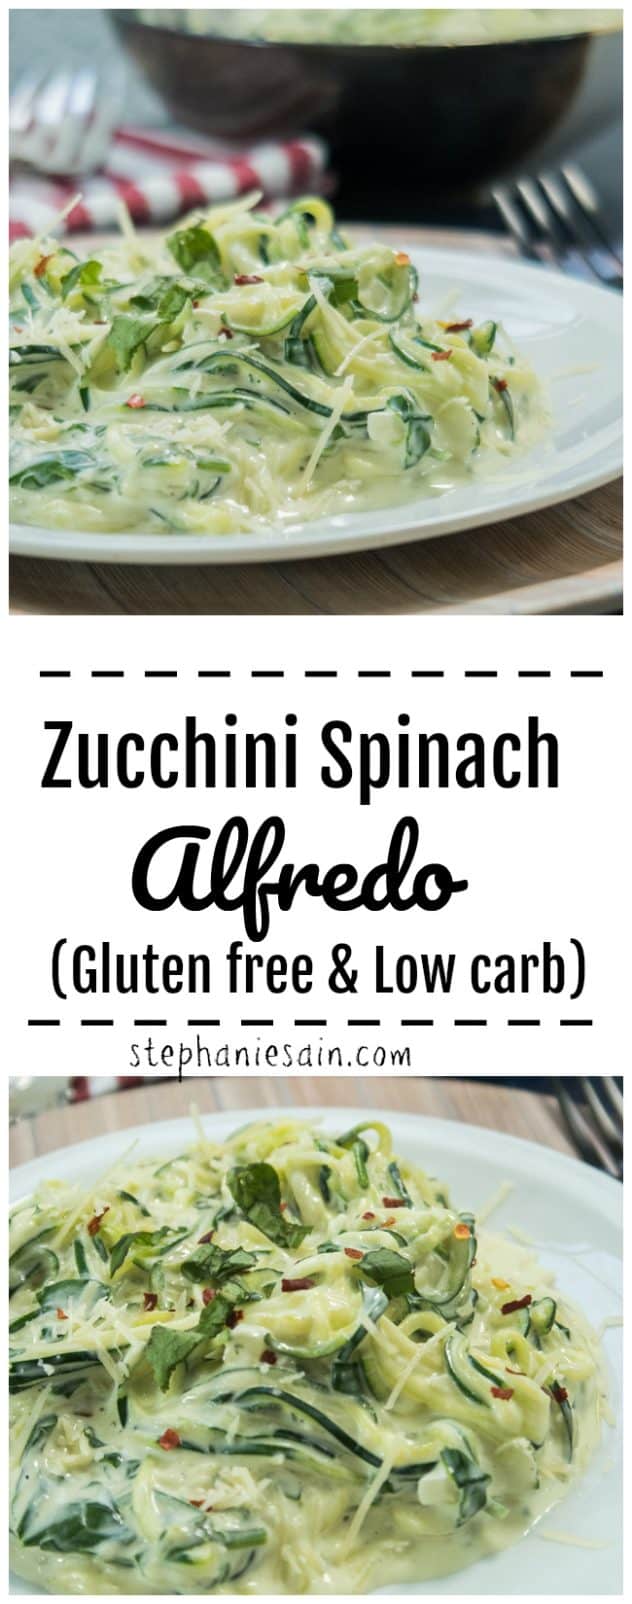 This Zucchini Spinach Alfredo is an easy, tasty dinner that can ready in on the table in 15 minutes. Healthy, low carb & Gluten Free.